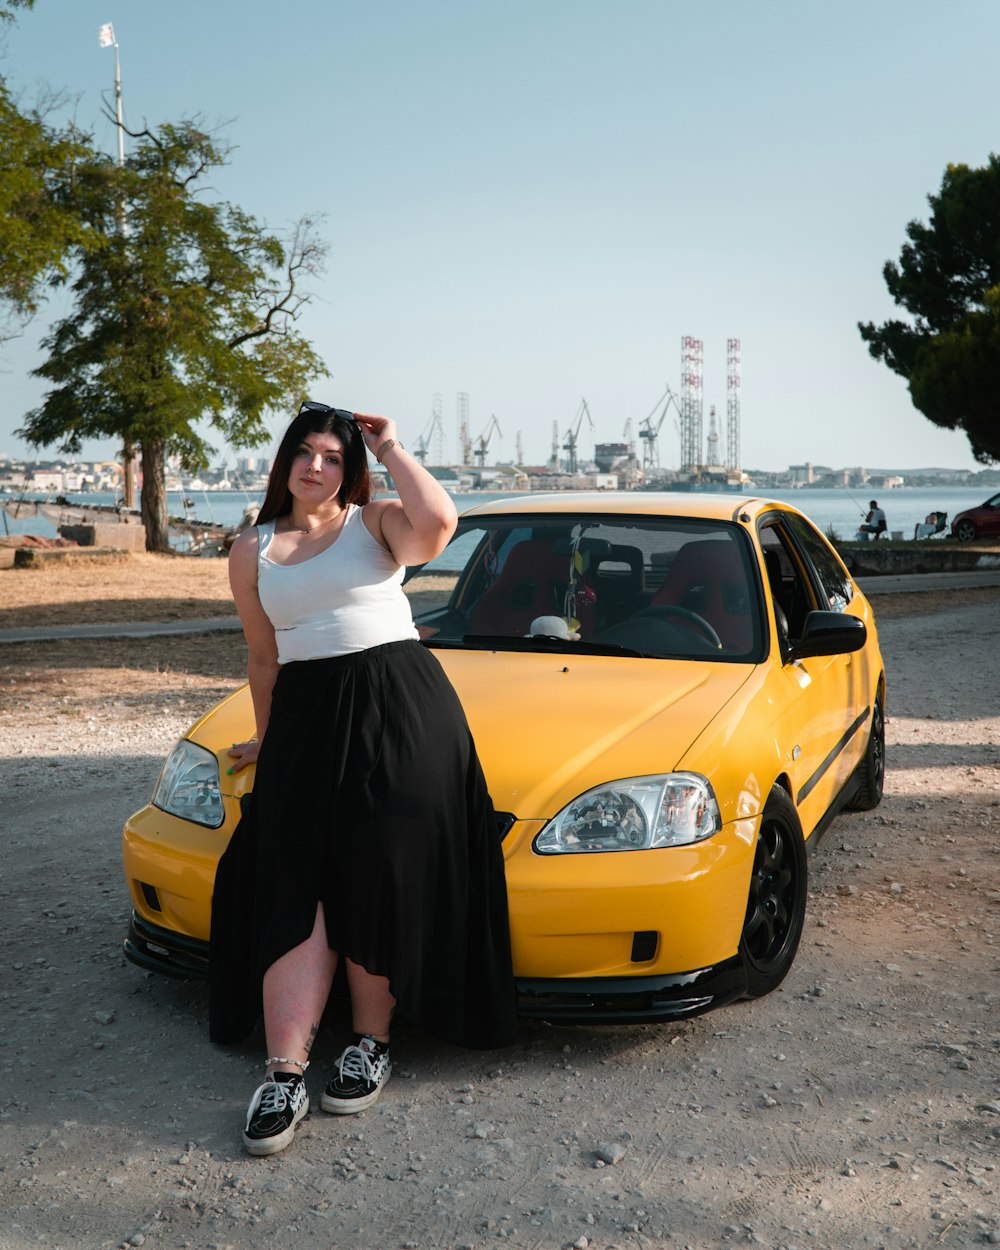 a woman standing next to a yellow car